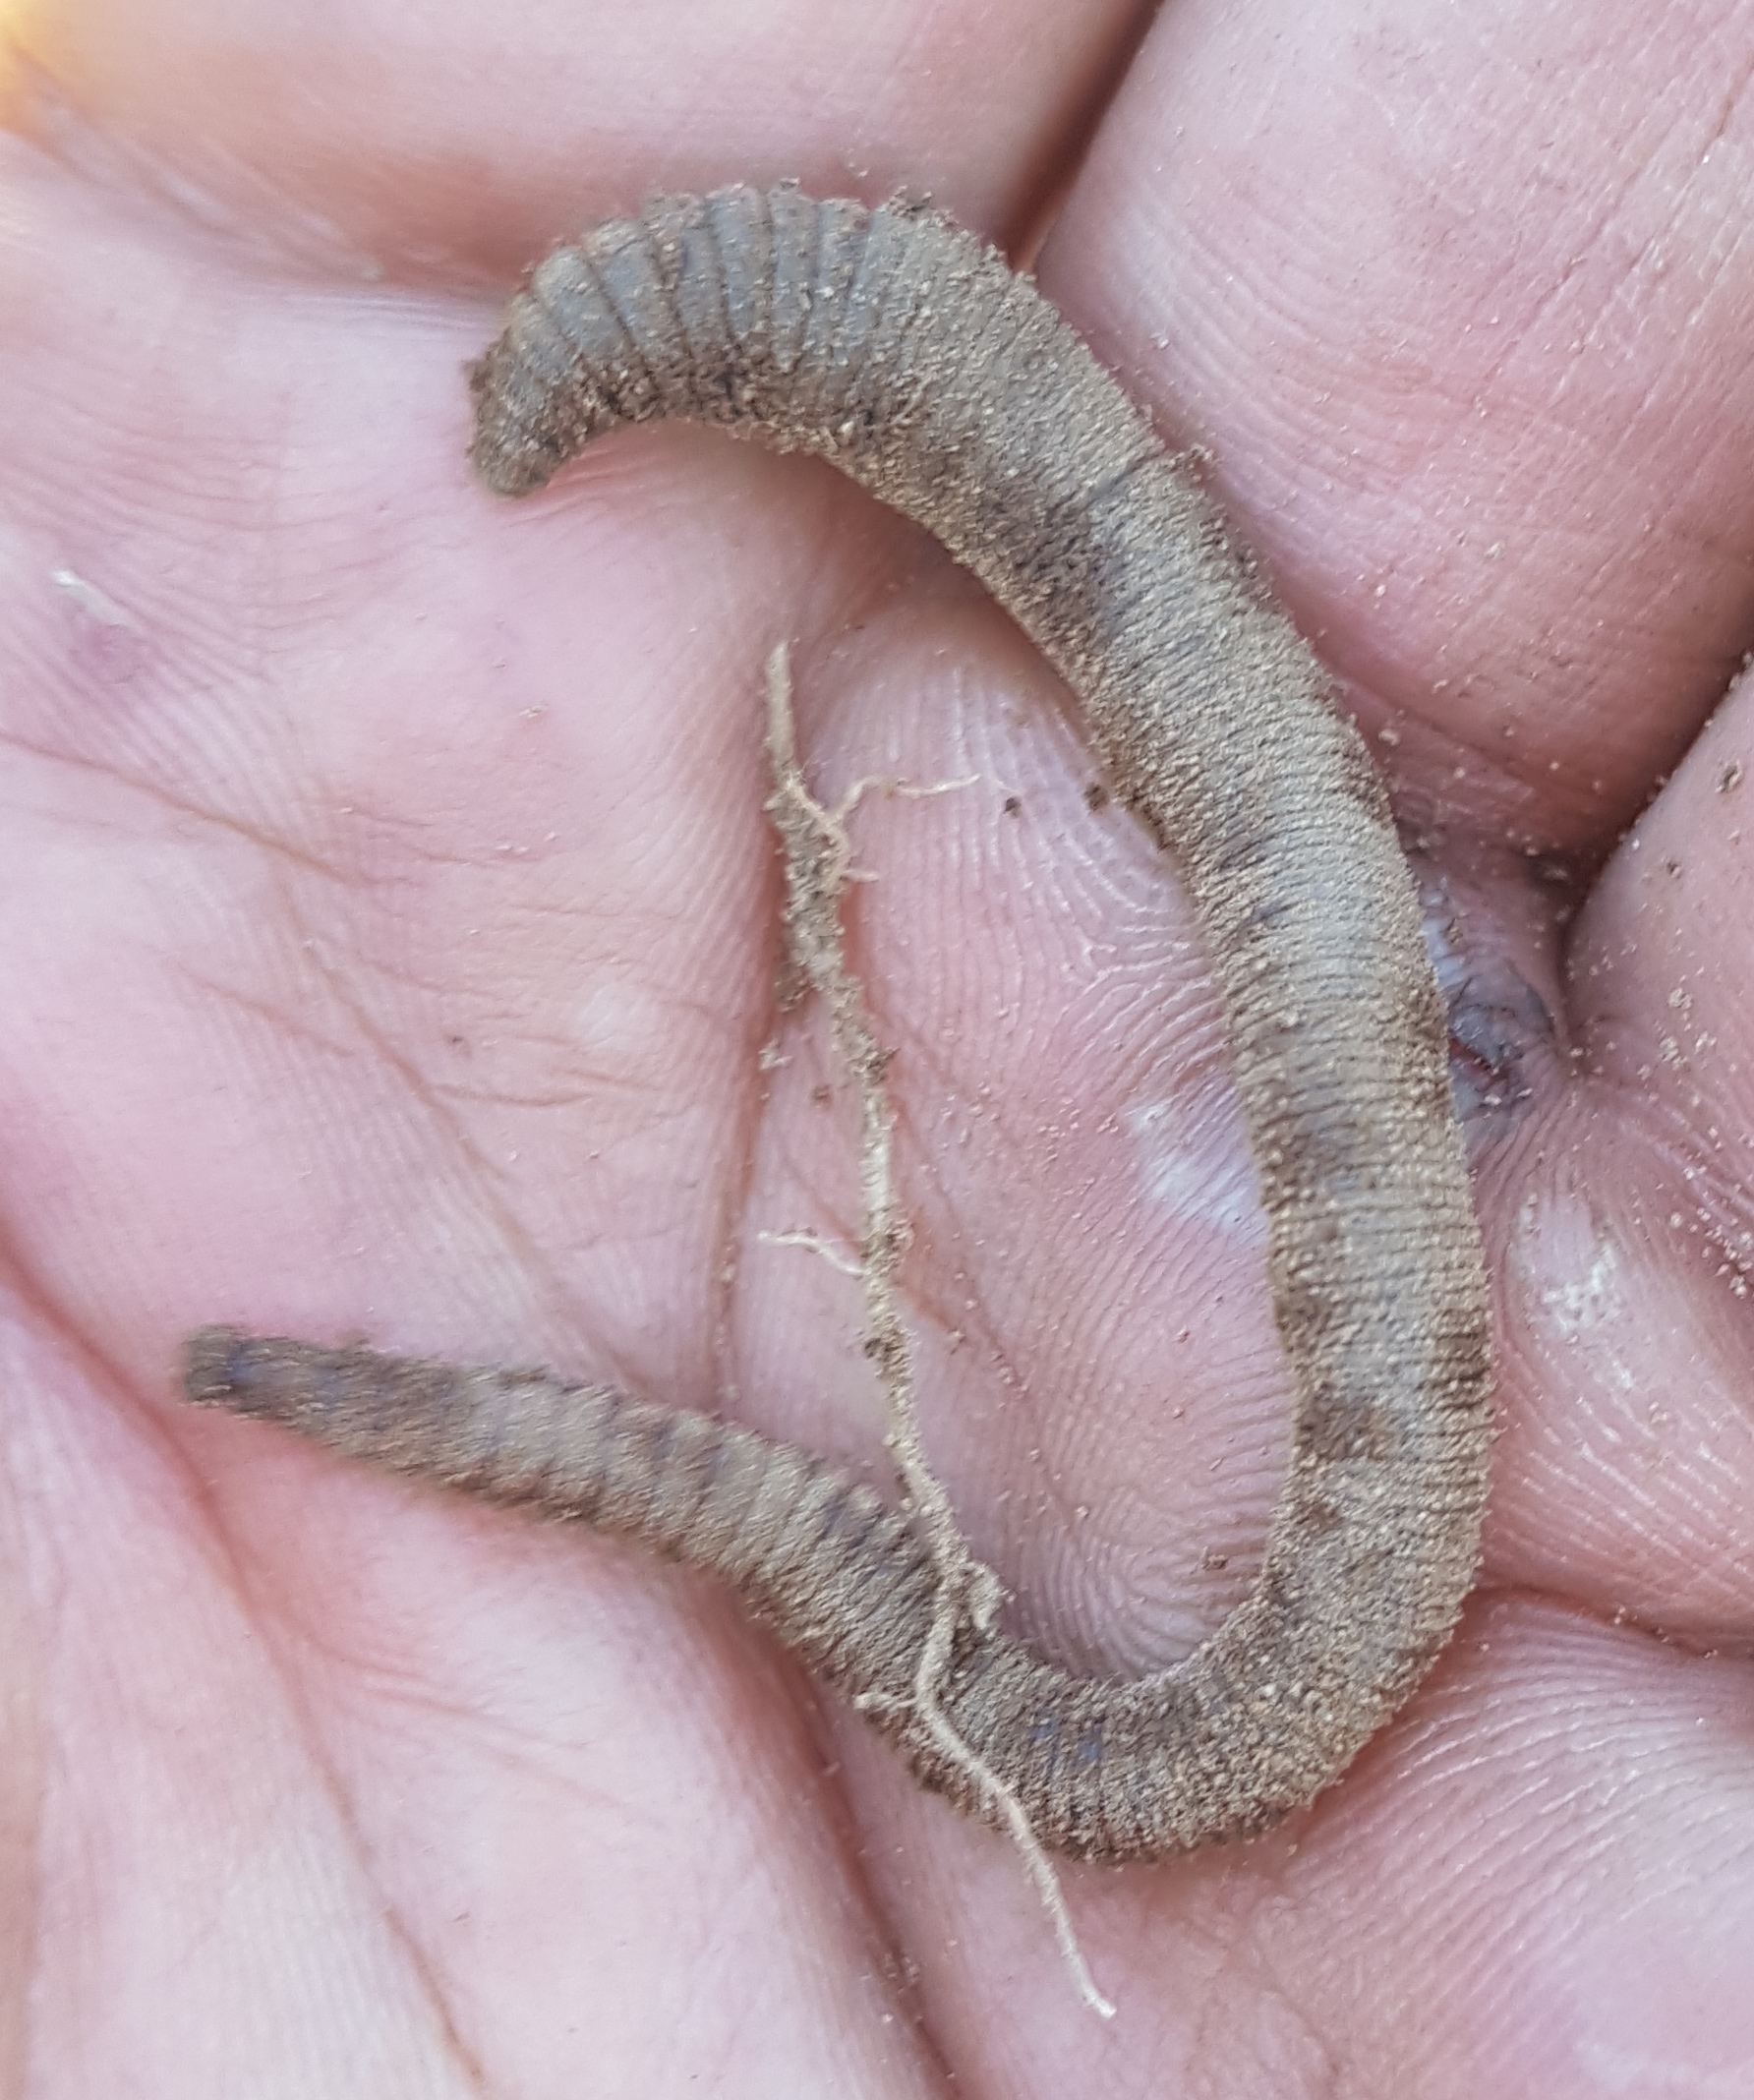 Worm 1 of only the two that we encountered while digging the trenches for the seed beds.